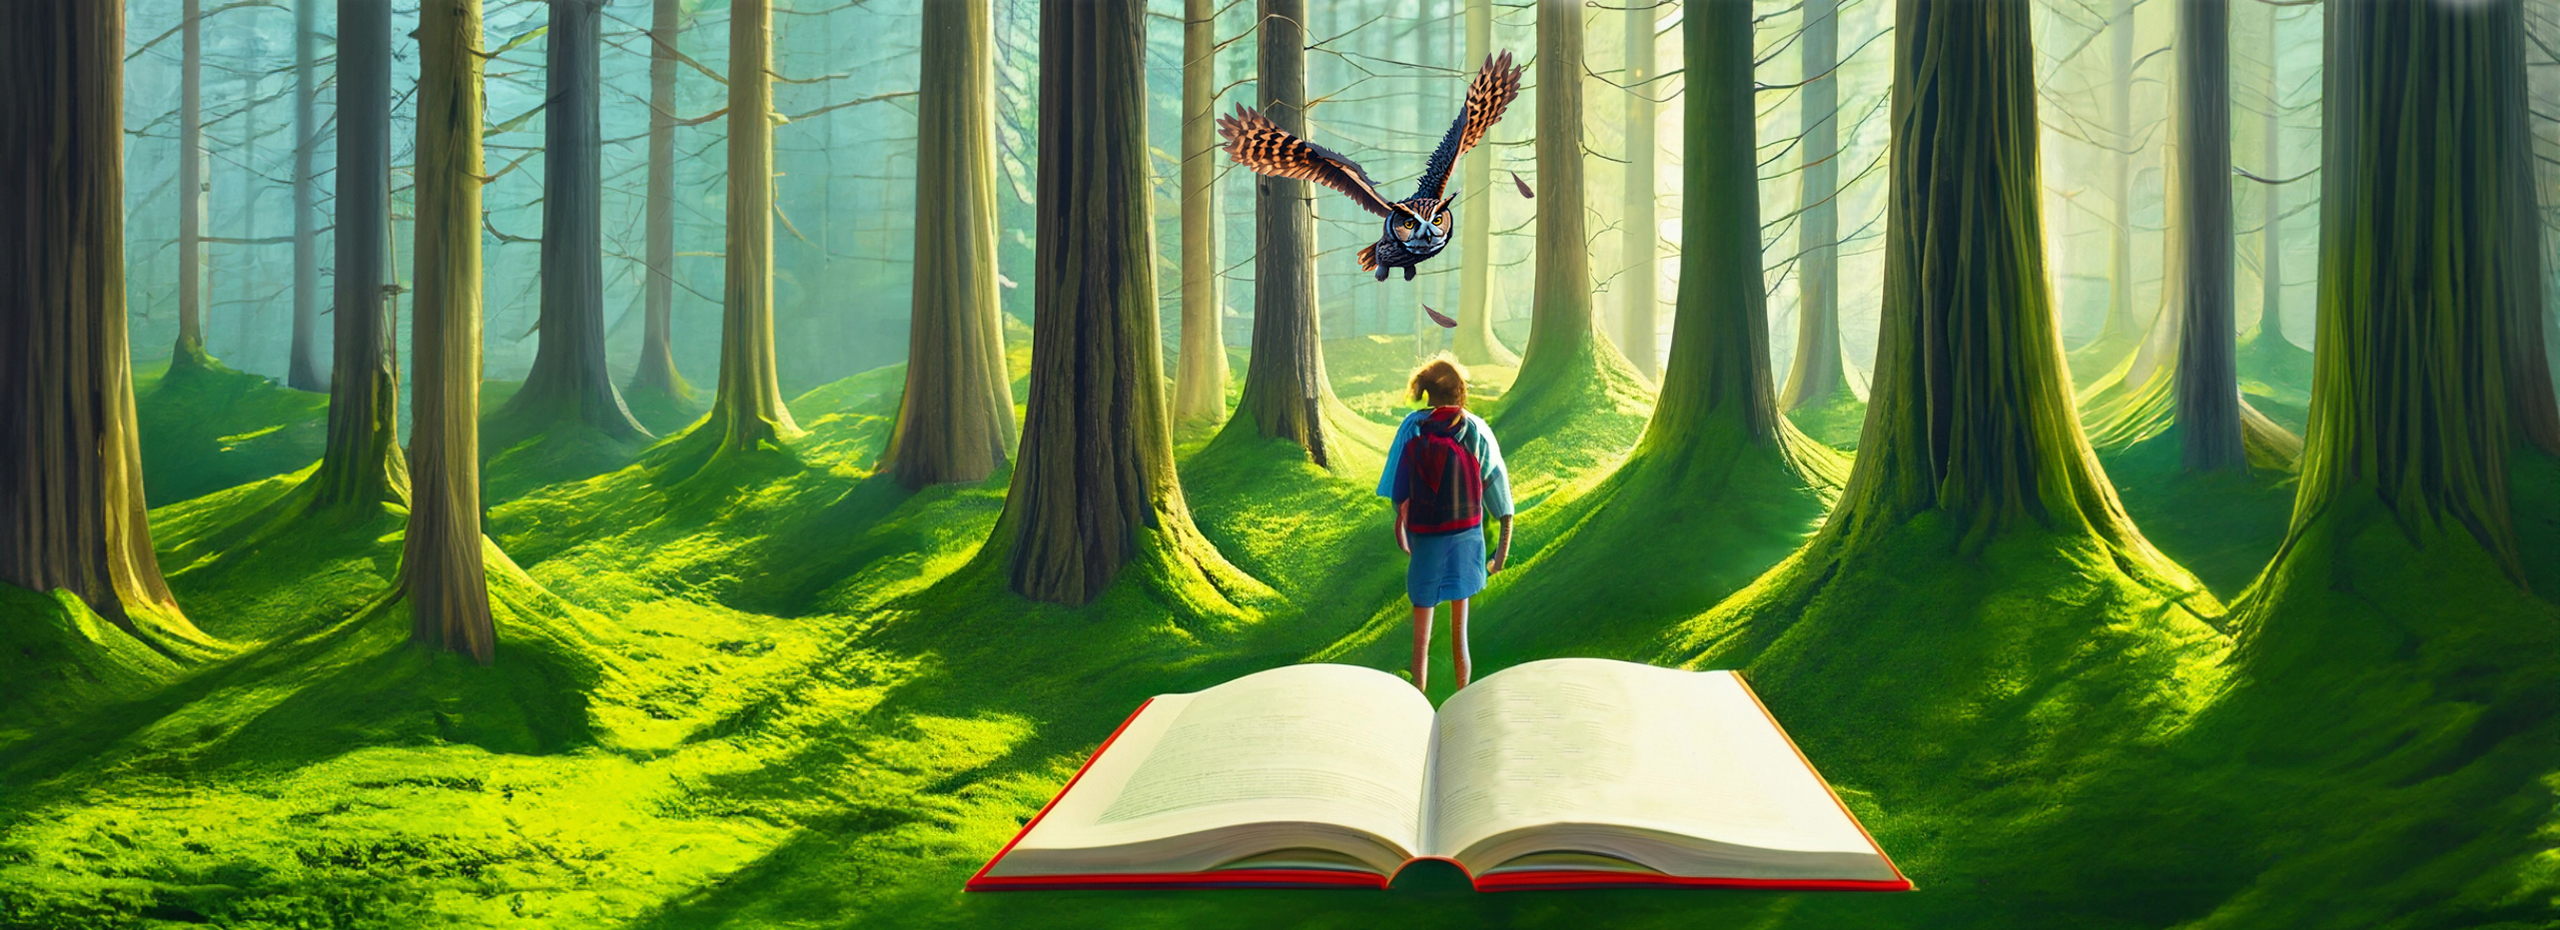 Graphic rendering of an open book in front of a young person and a large bird in the distance of a forest with trees casting shadows